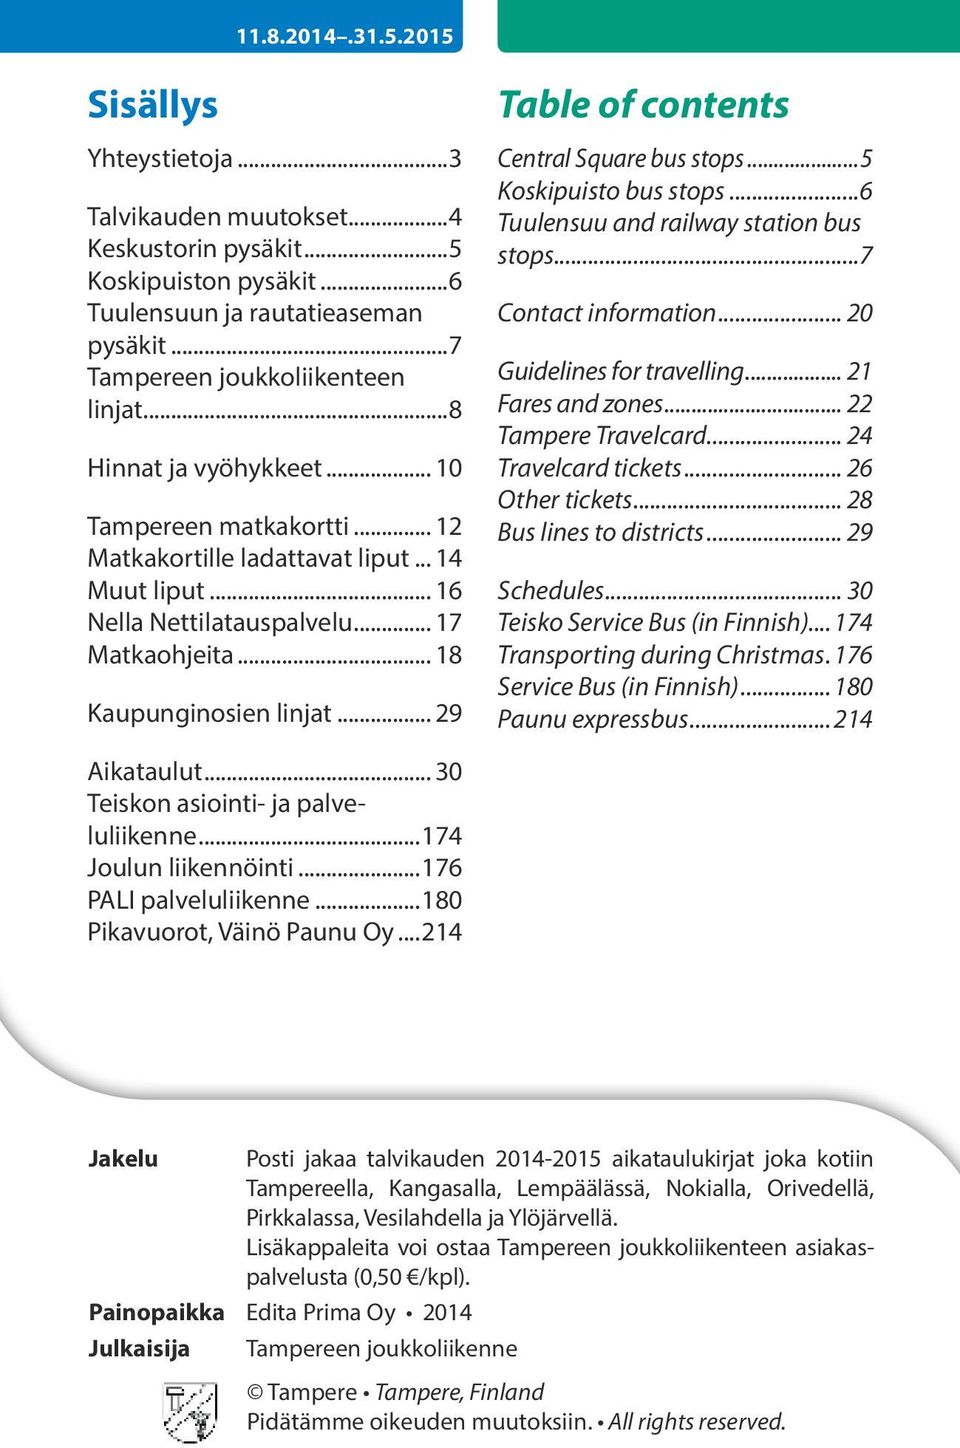 .. 29 Table of contents Central Square bus stops...5 Koskipuisto bus stops...6 Tuulensuu and railway station bus stops...7 Contact information... 20 uidelines for travelling... 21 ares and zones.